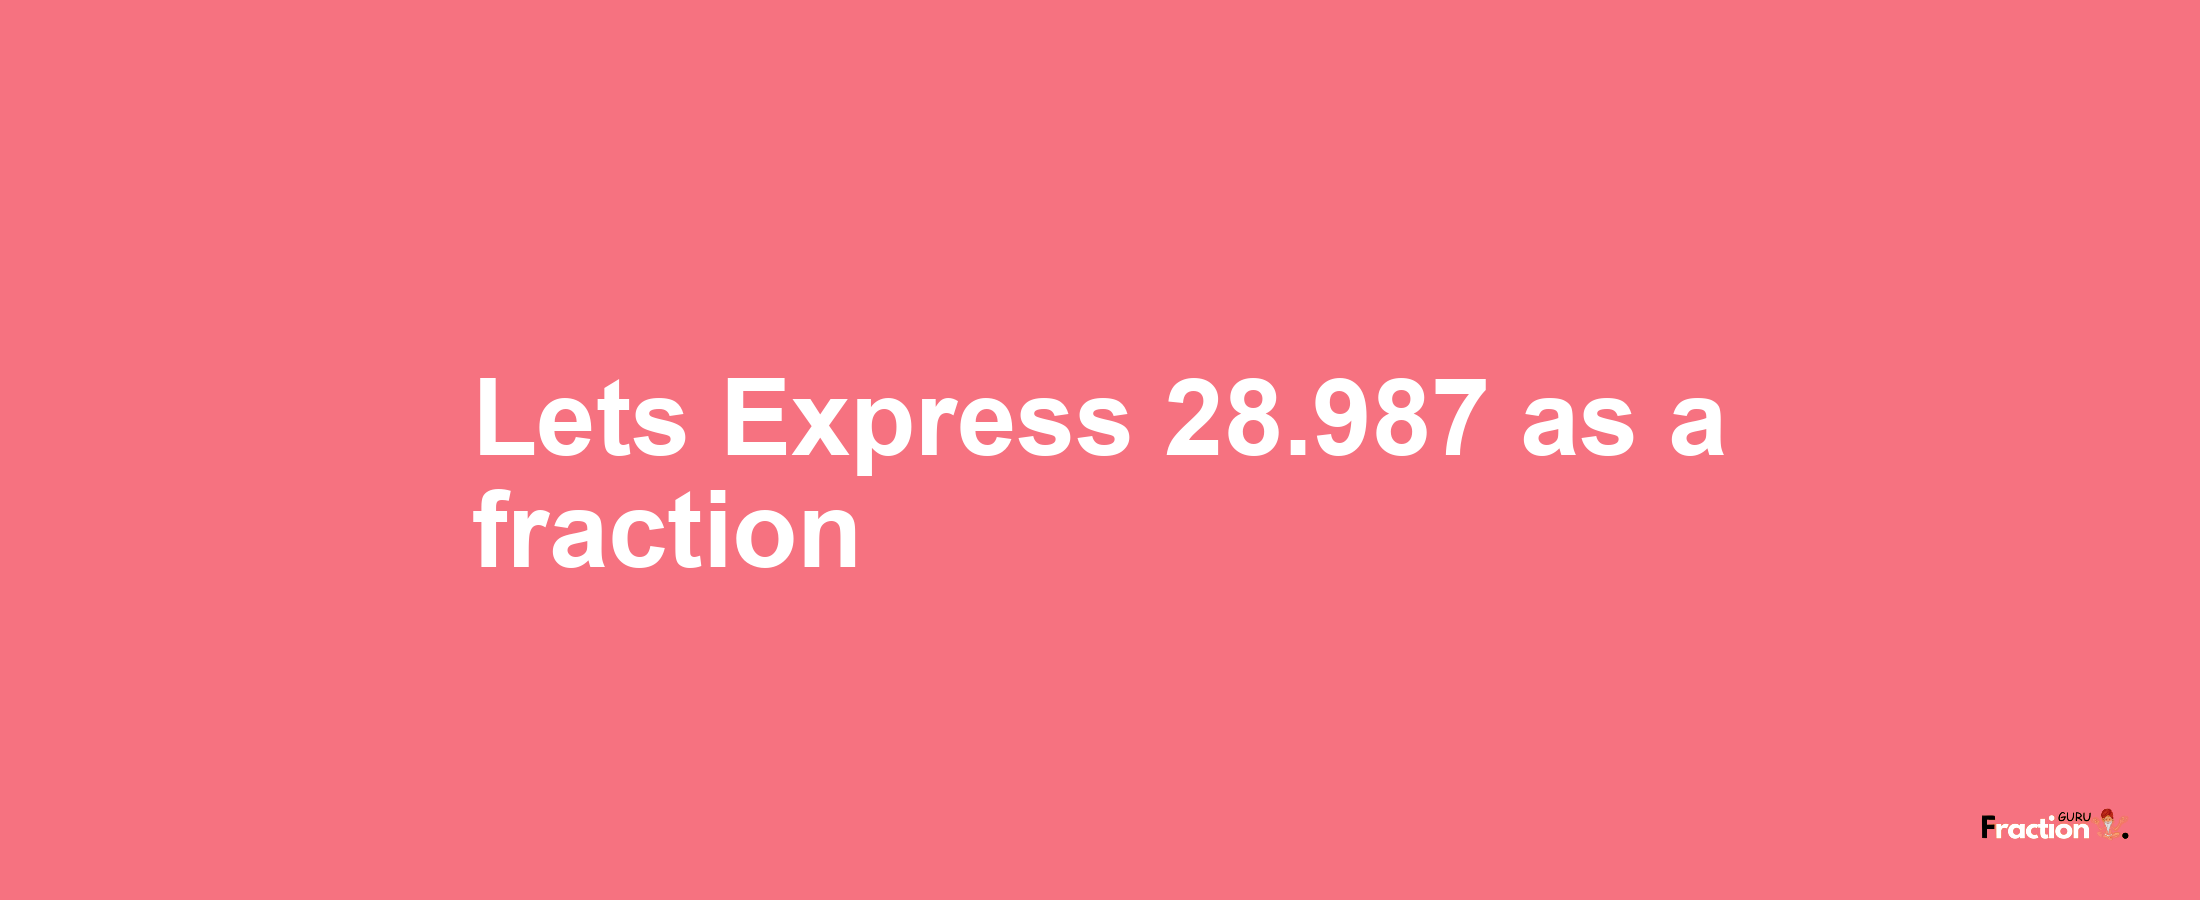 Lets Express 28.987 as afraction